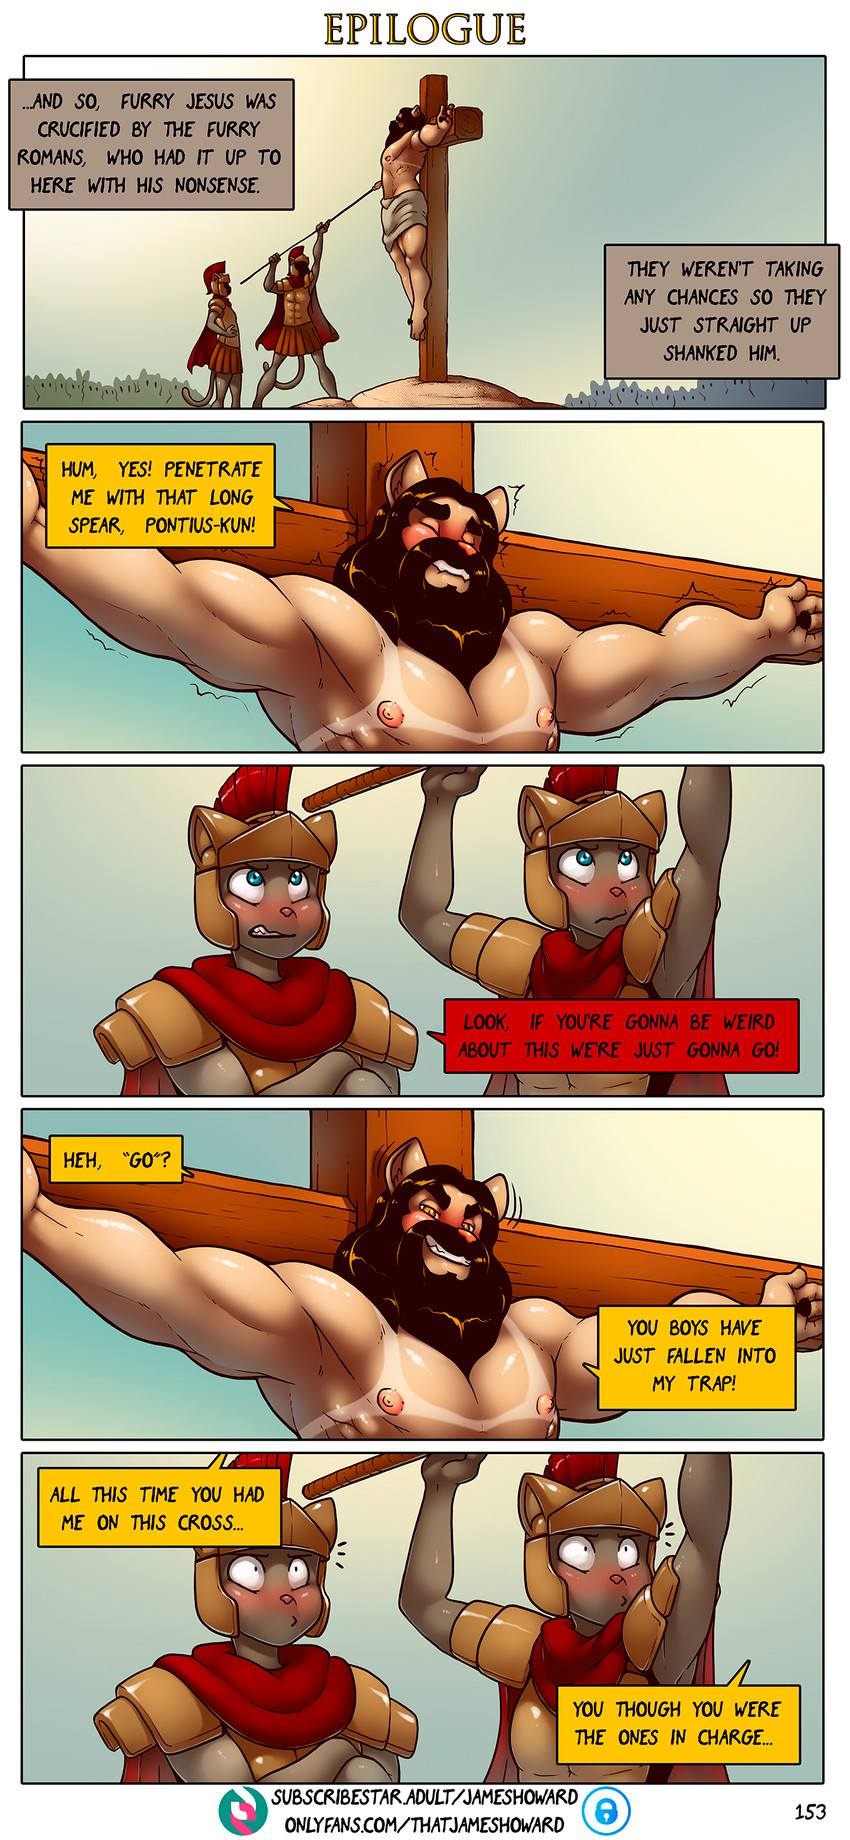 furry jesus and jesus christ (subscribestar and etc) created by james howard